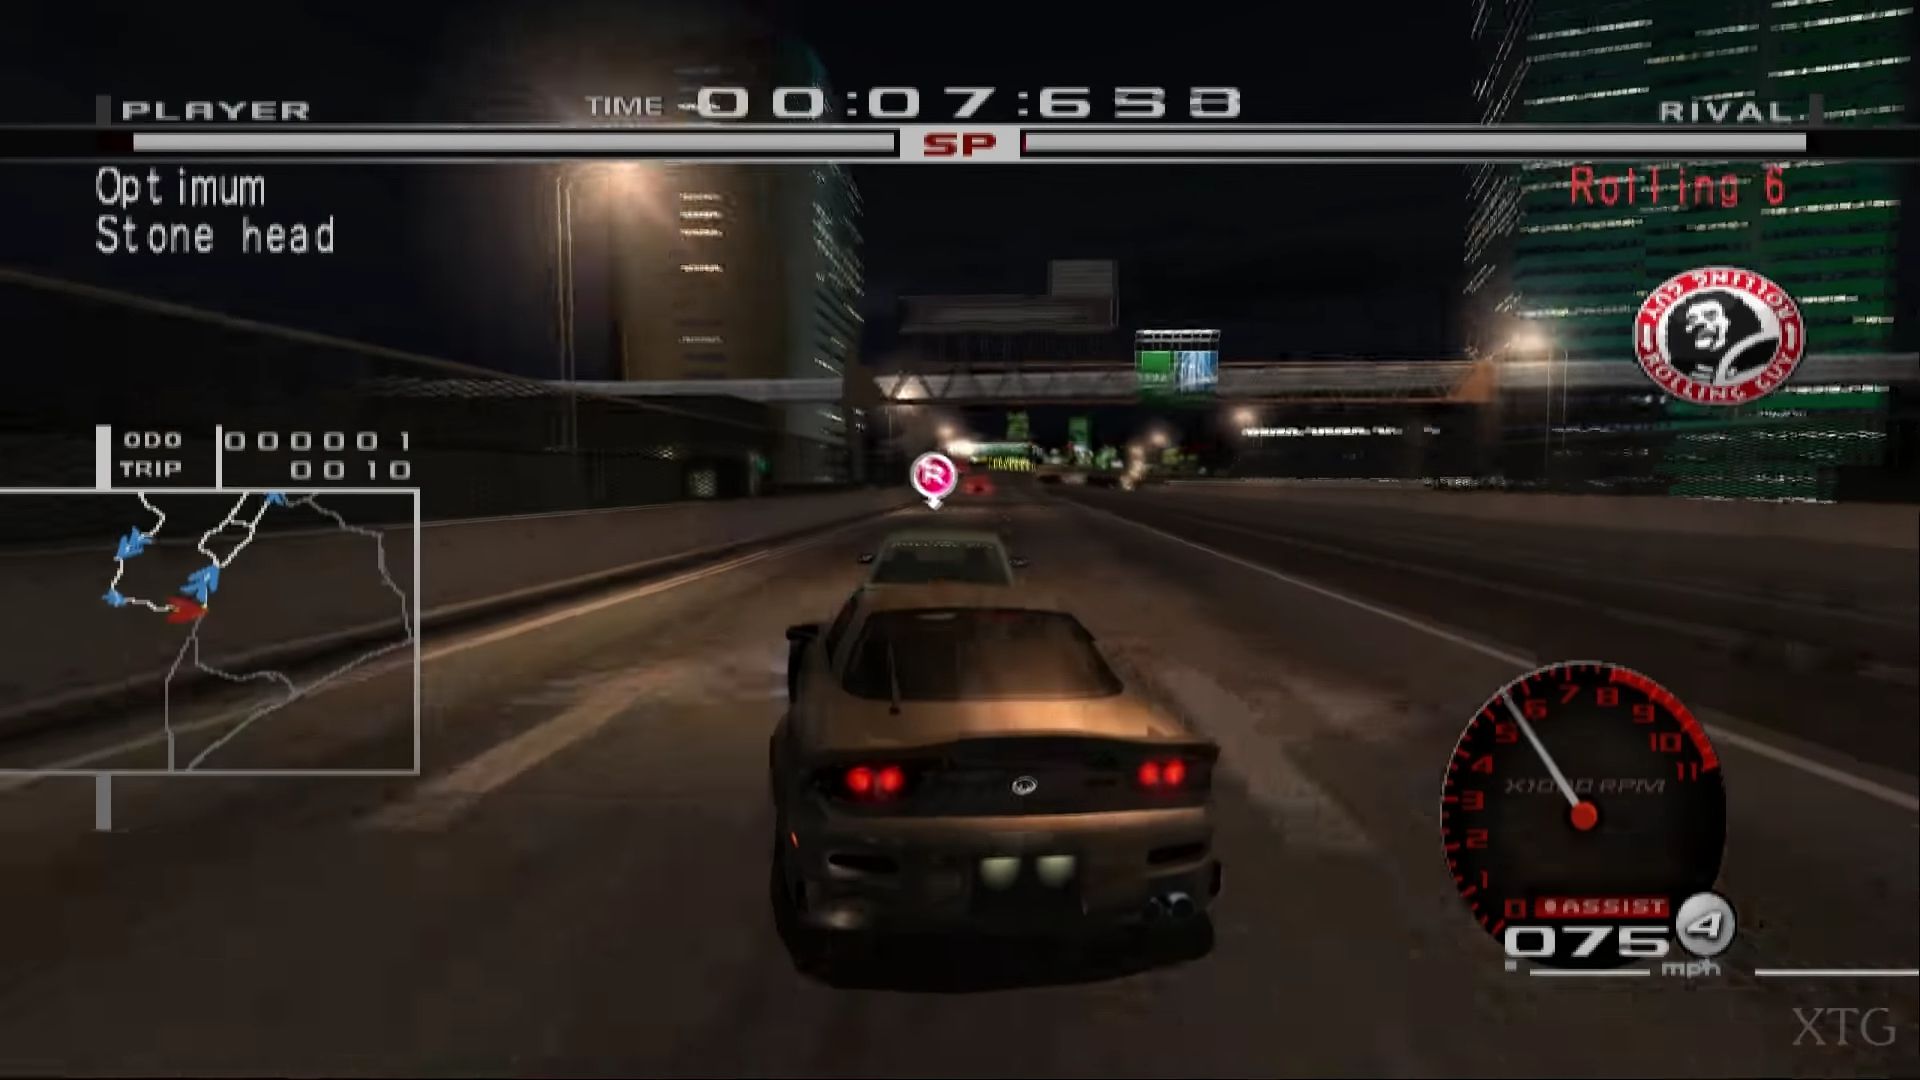 tokyo xtreme racer 3 iso